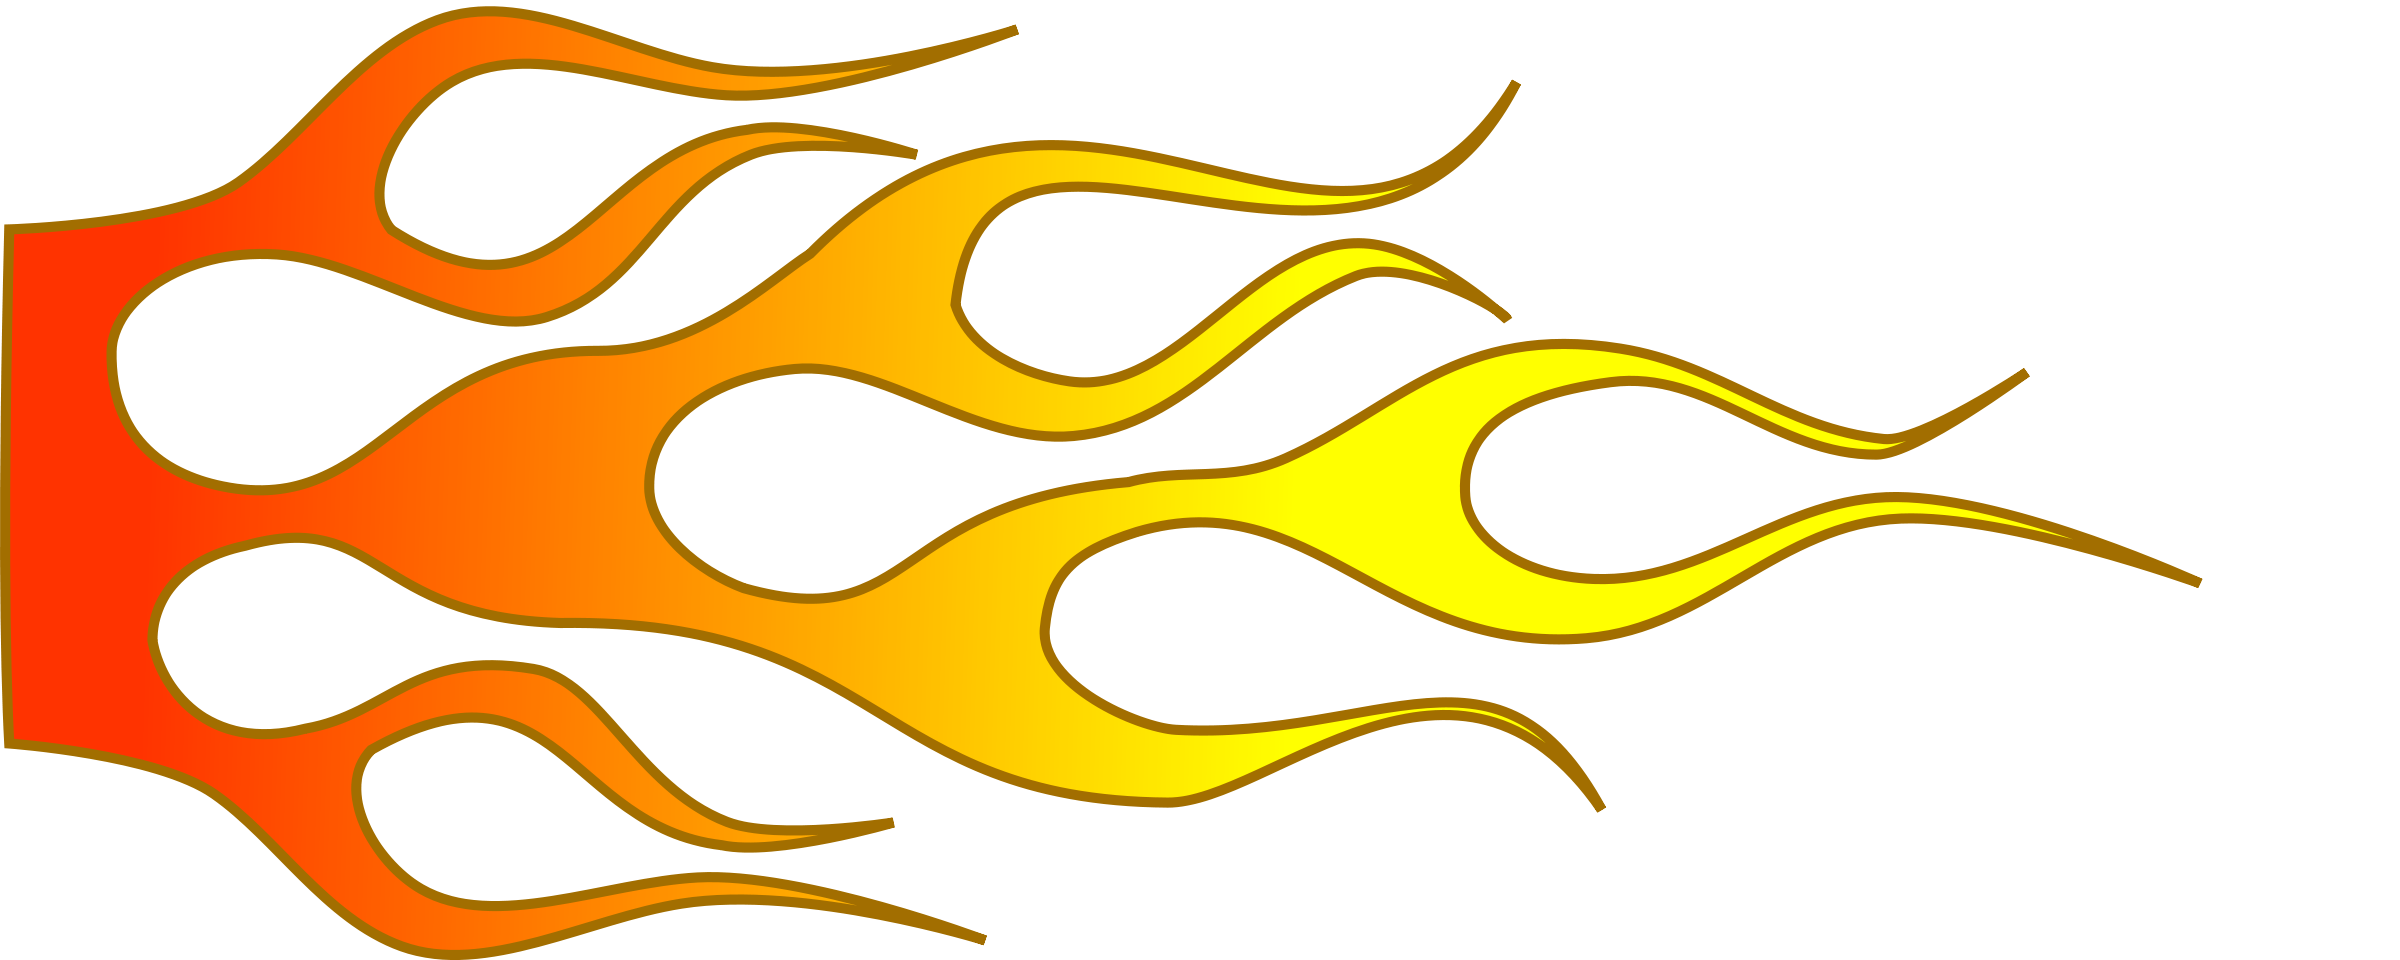 Flames Decal ClipArt Best